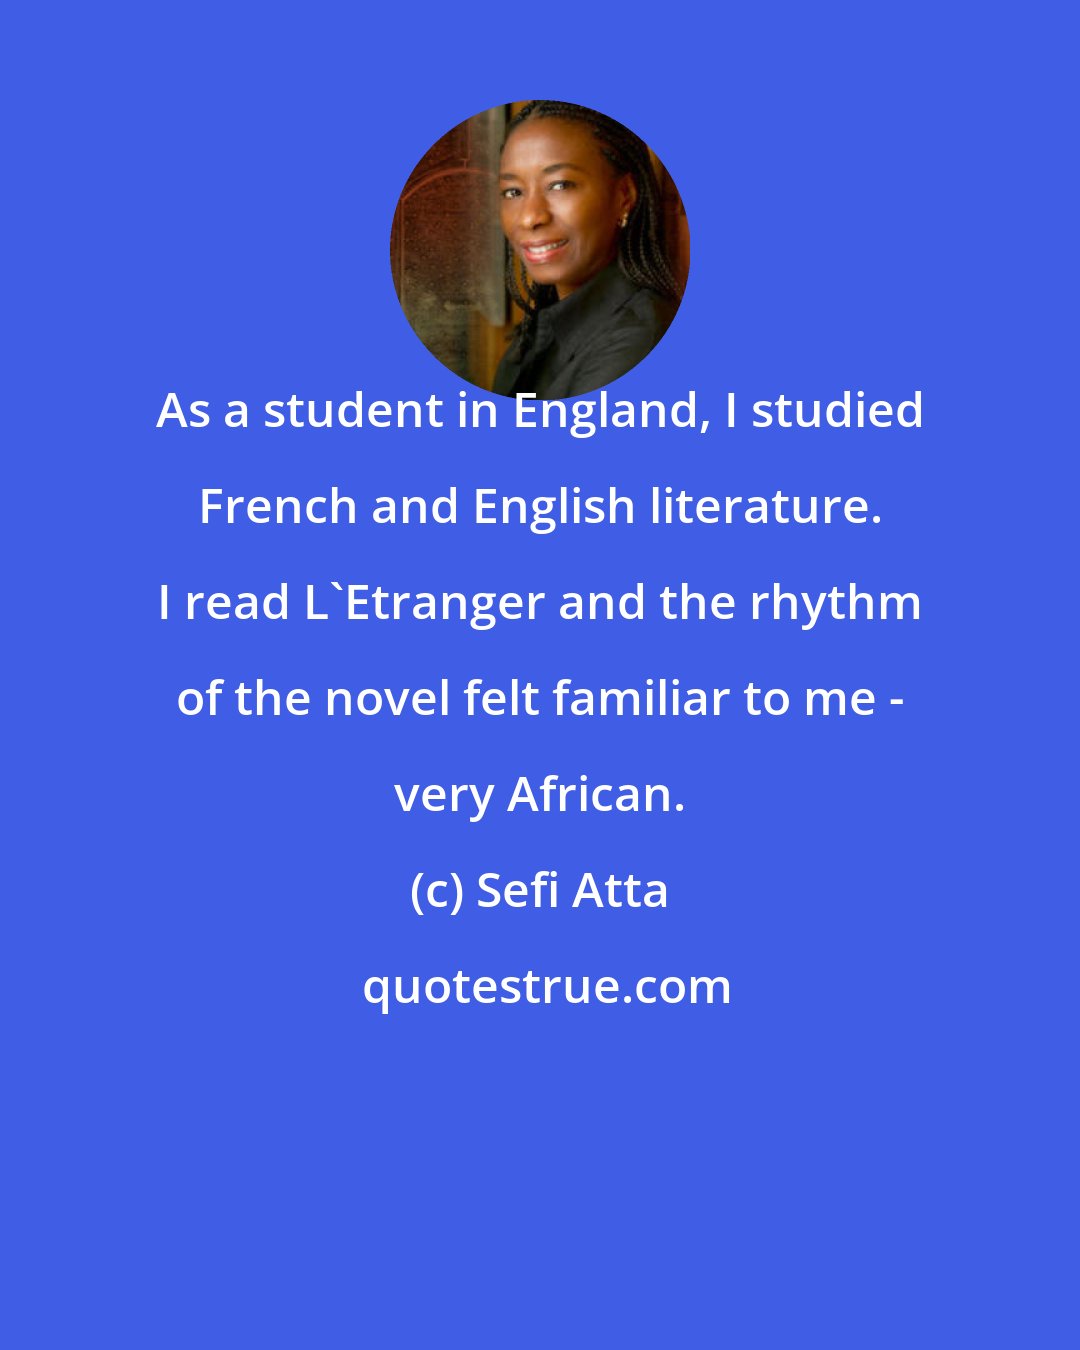 Sefi Atta: As a student in England, I studied French and English literature. I read L'Etranger and the rhythm of the novel felt familiar to me - very African.